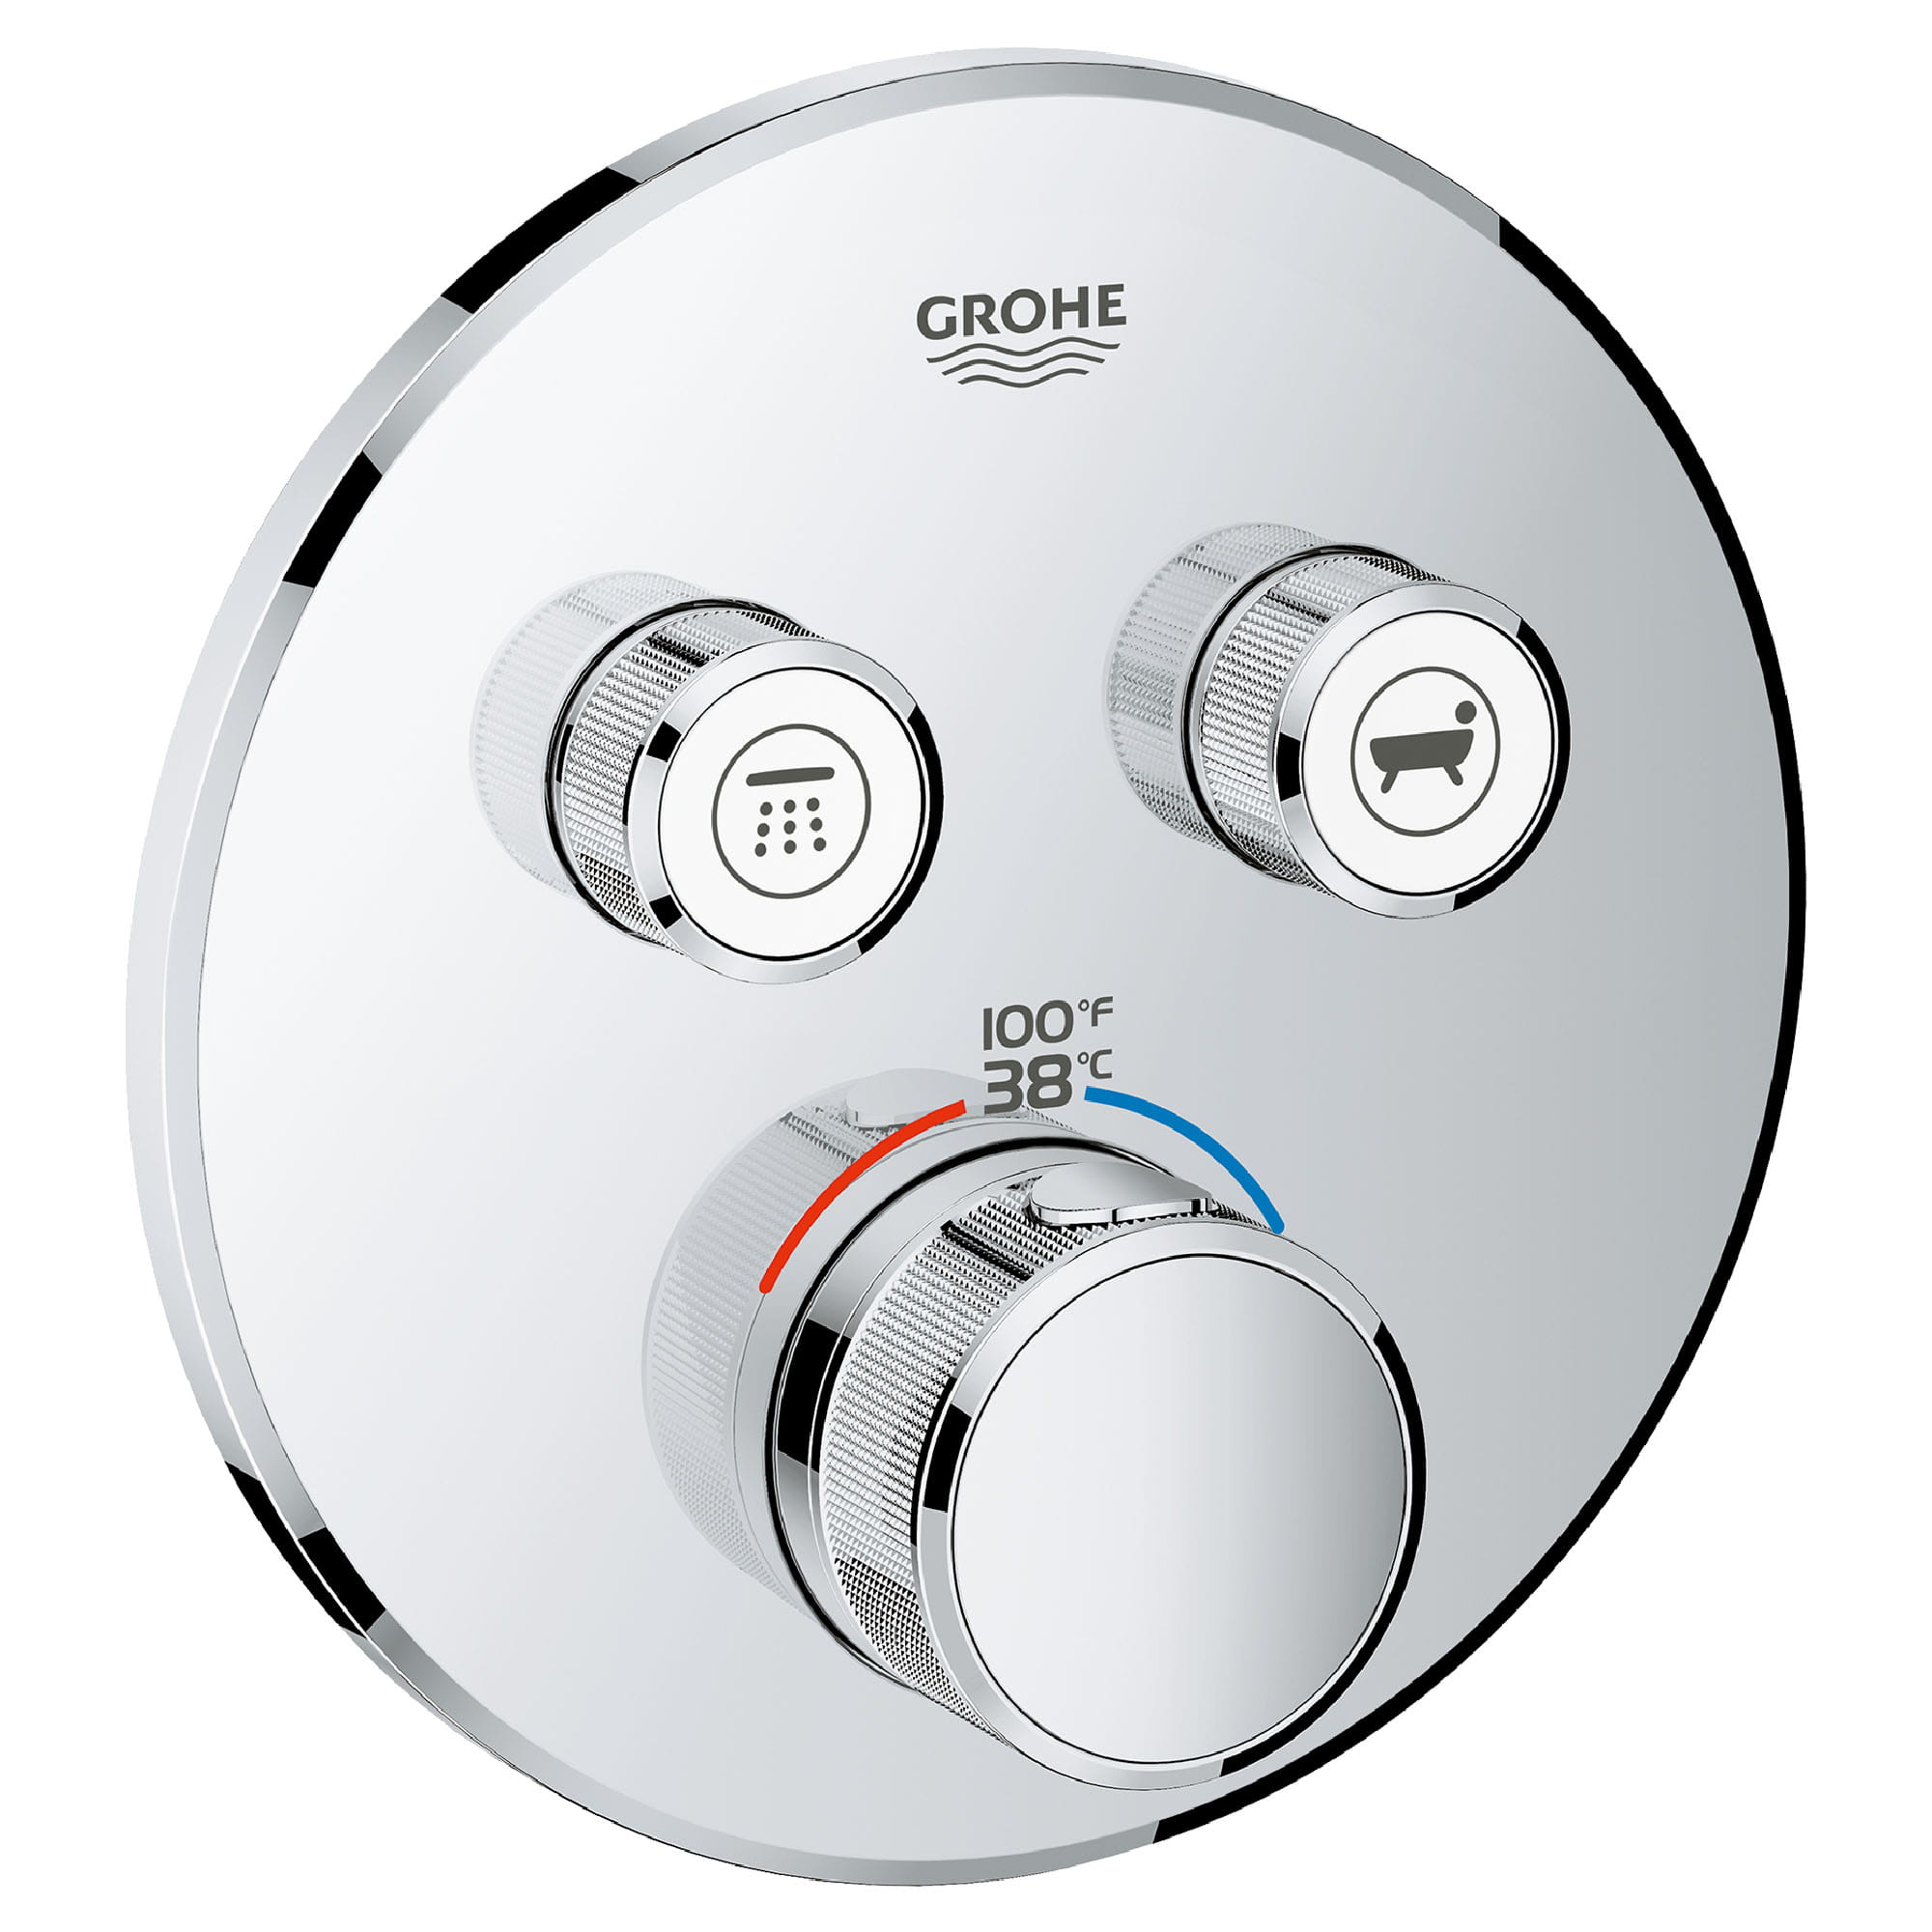 GROHE grohe grohtherm smartcontrol round concealed mixer trimset 3 valve 29146000 